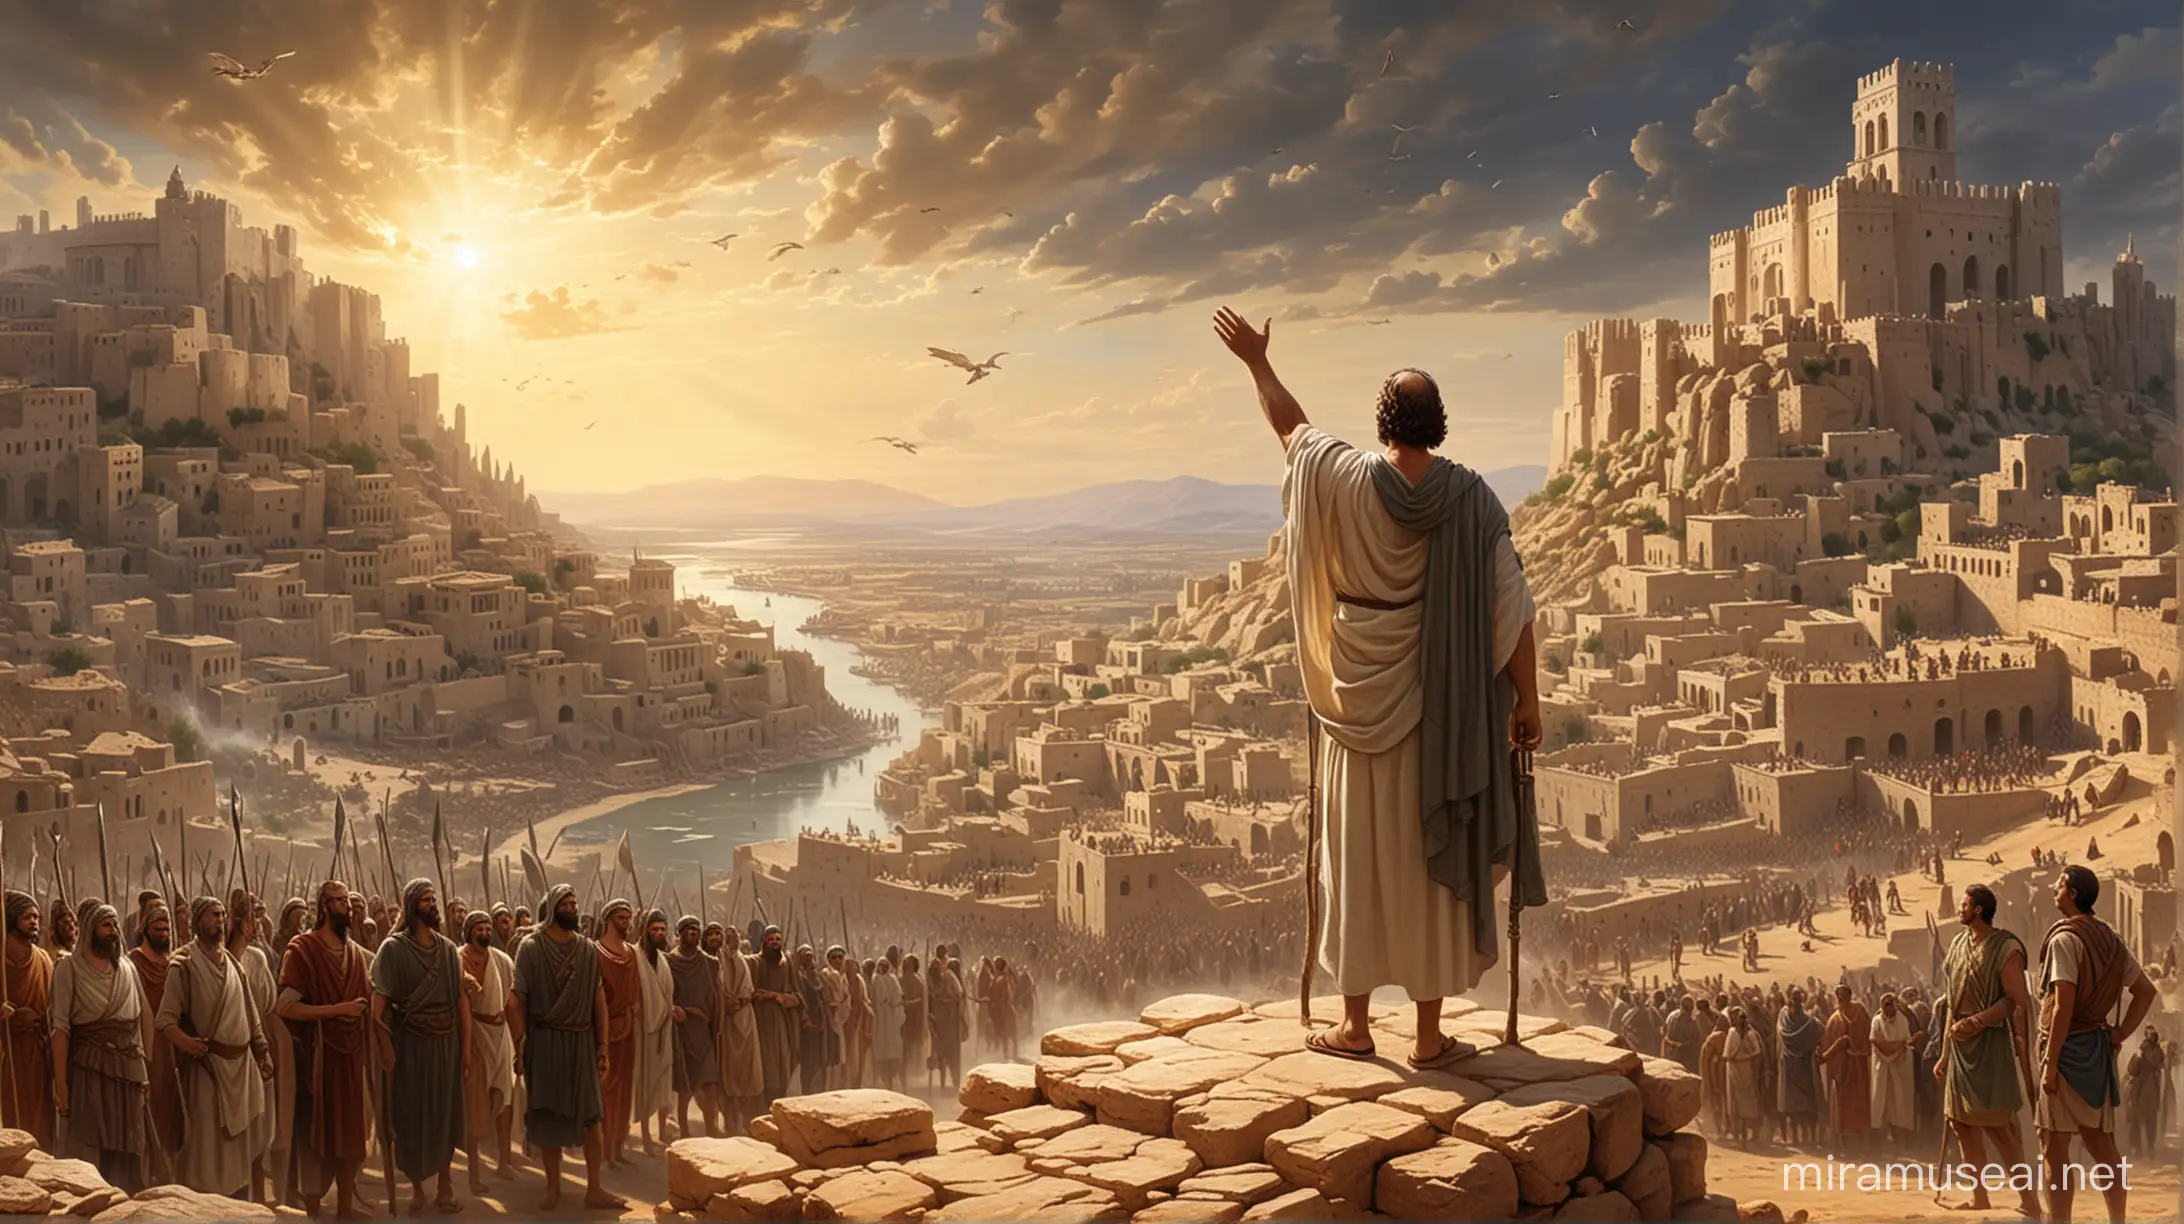 Generate an image depicting Nimrod's leadership in founding great cities under his rule, as recounted in Genesis 10:8-12. Show Nimrod overseeing the construction and development of these cities. 